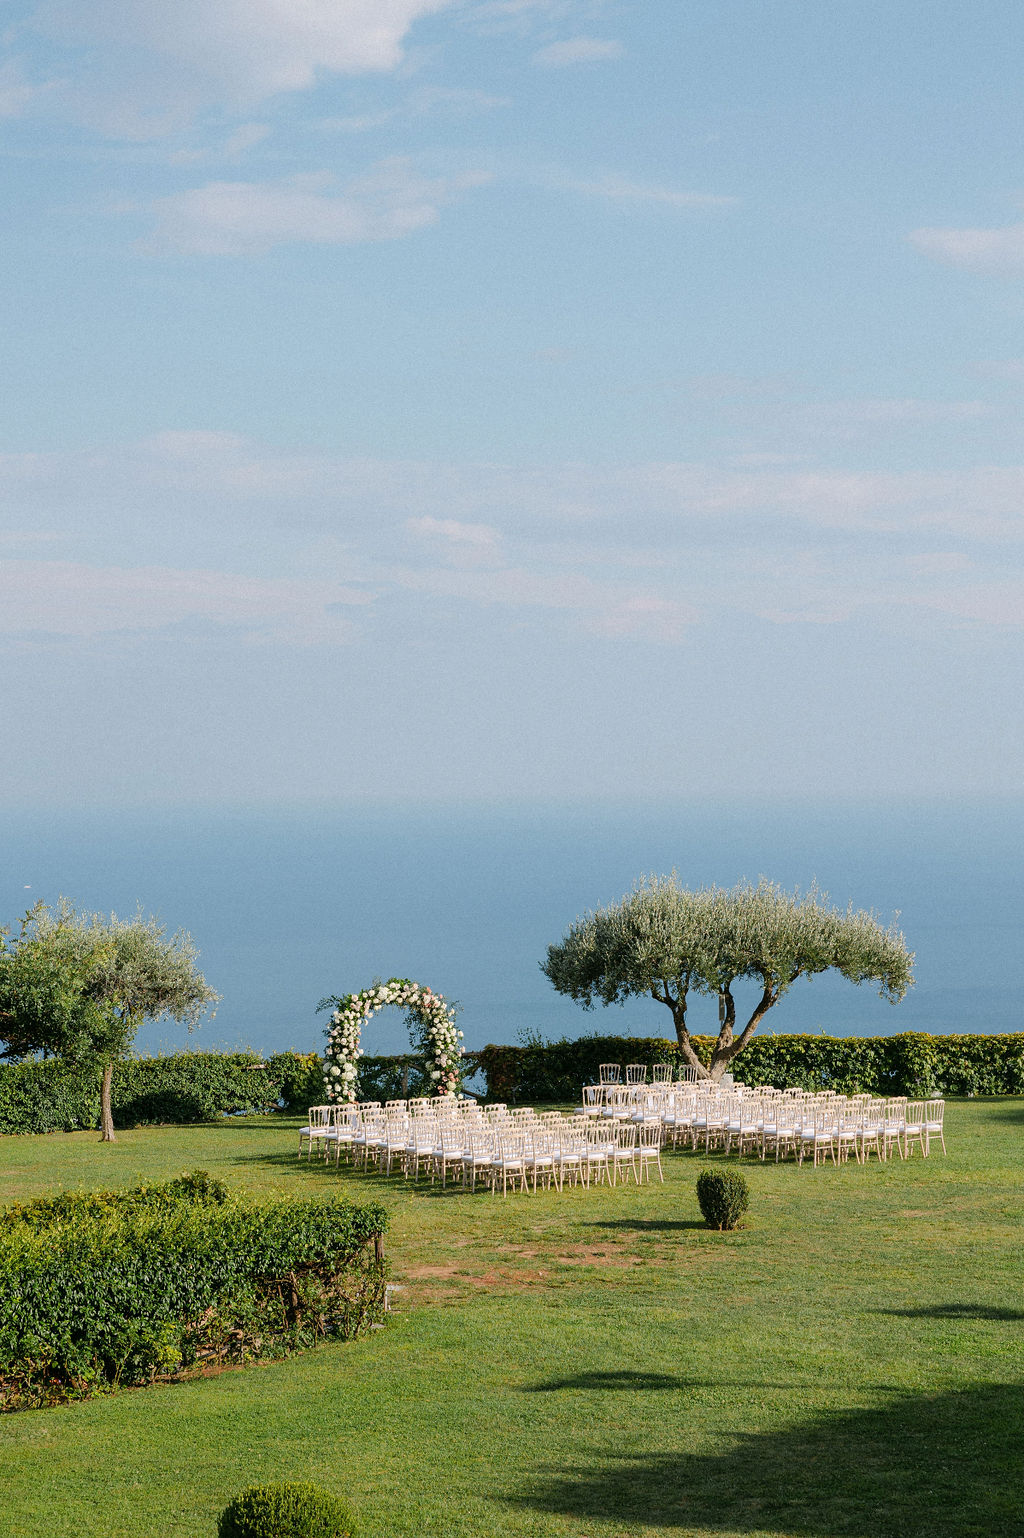 Garden of Villa Cimbrone with wedding ceremony setting with chairs and flowers arch